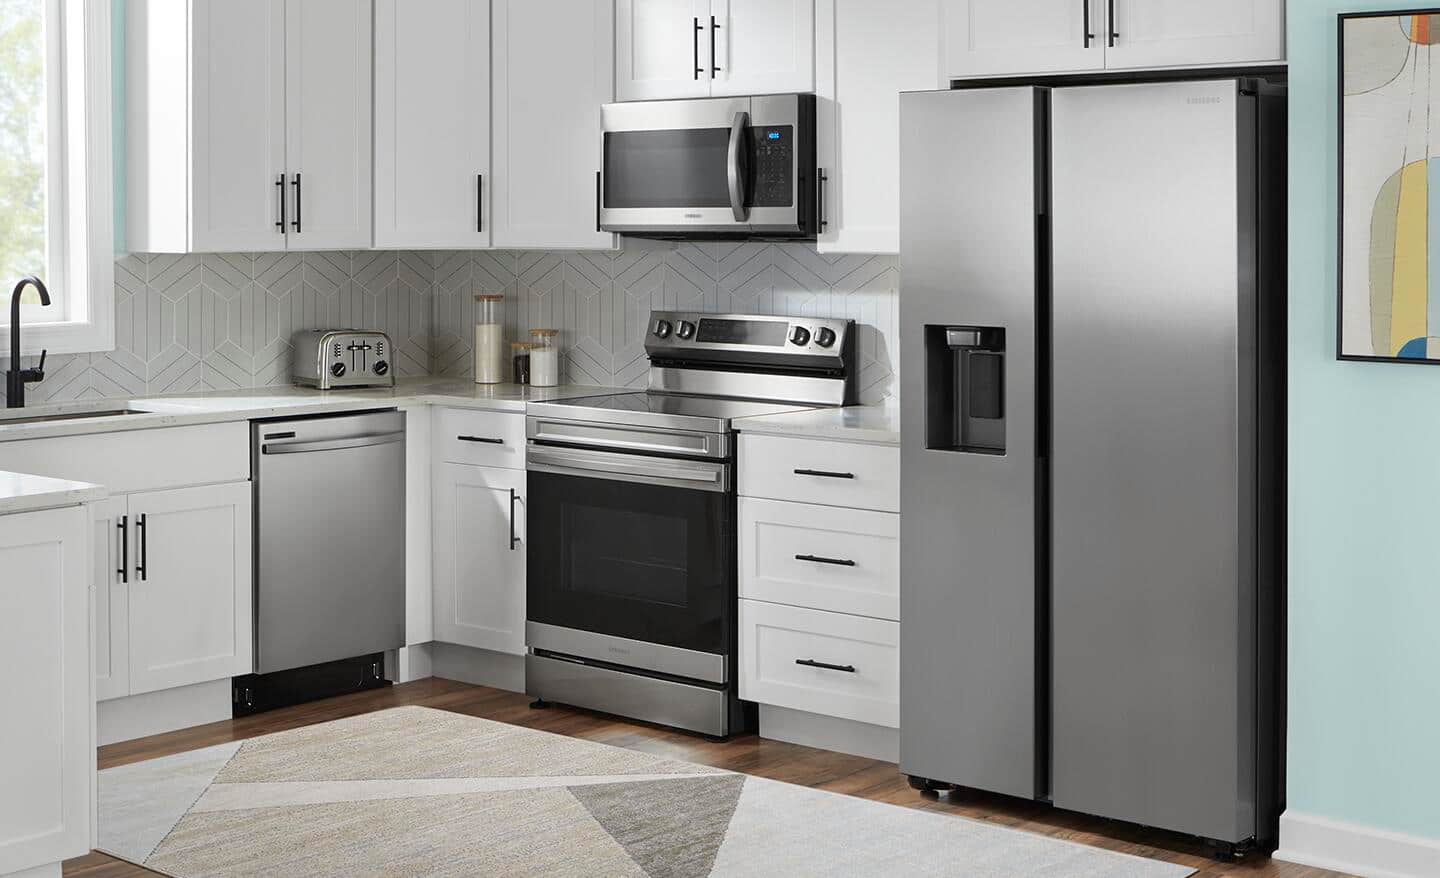 A stainless steel standard refrigerator fit into built-in cabinets.